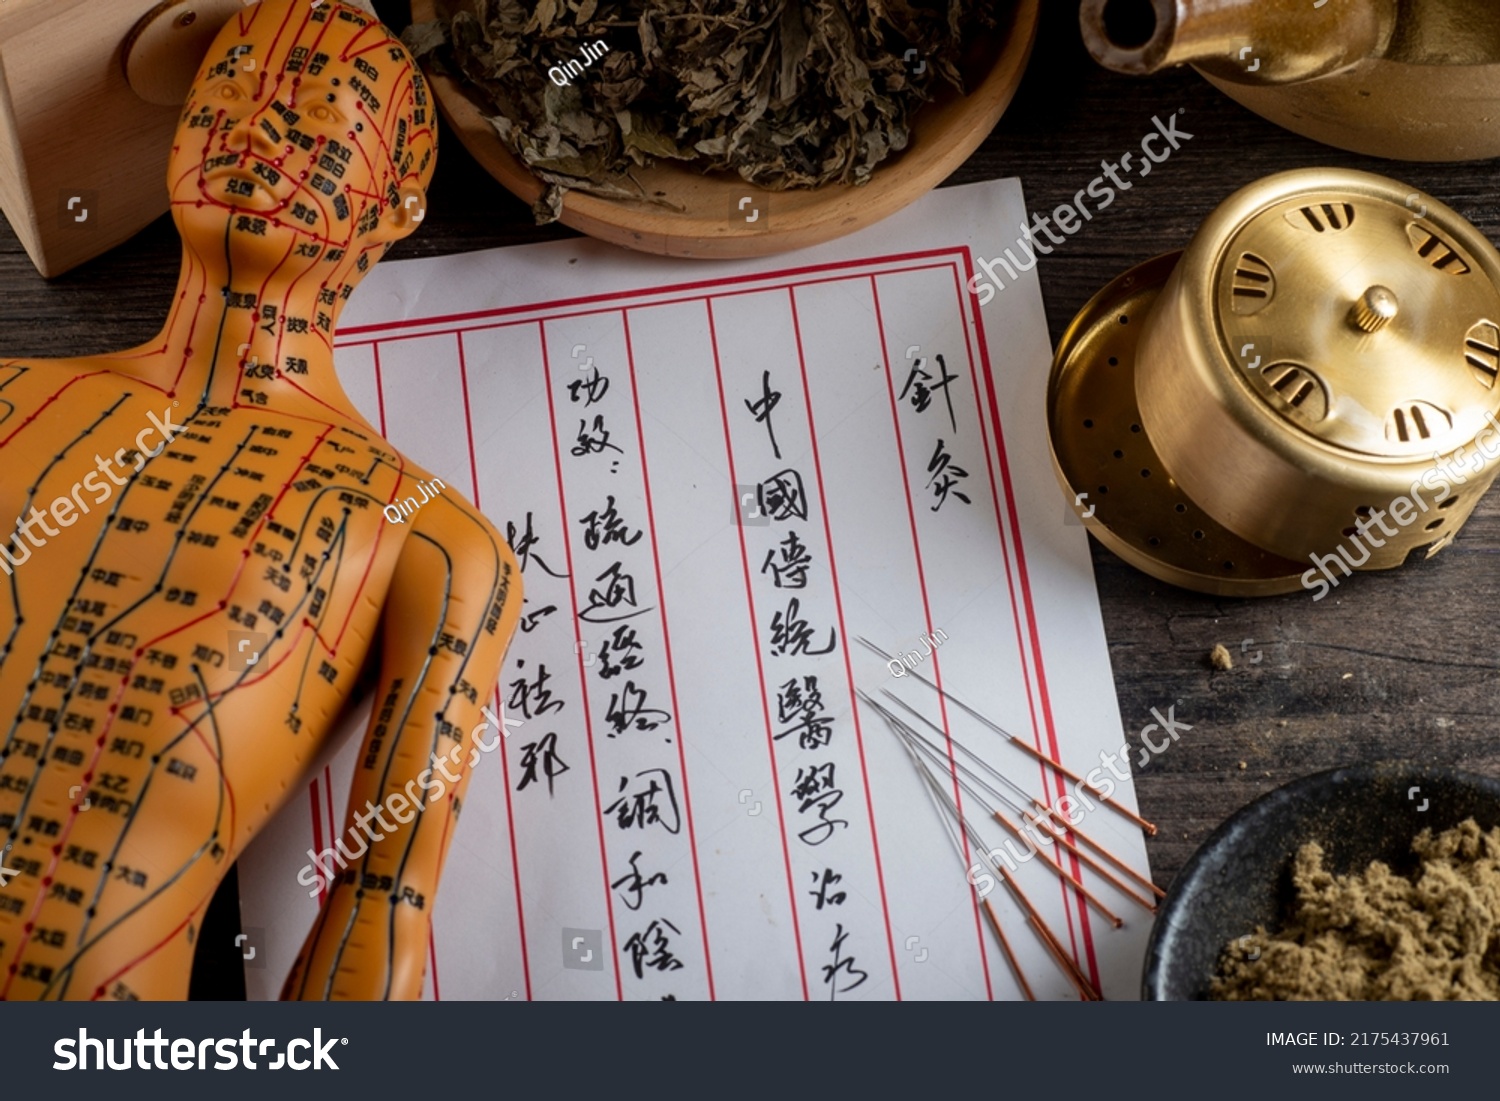 Background of moxibustion and Chinese herbal medicine. Chinese character translation：Acupuncture is a traditional Chinese medical method. #2175437961